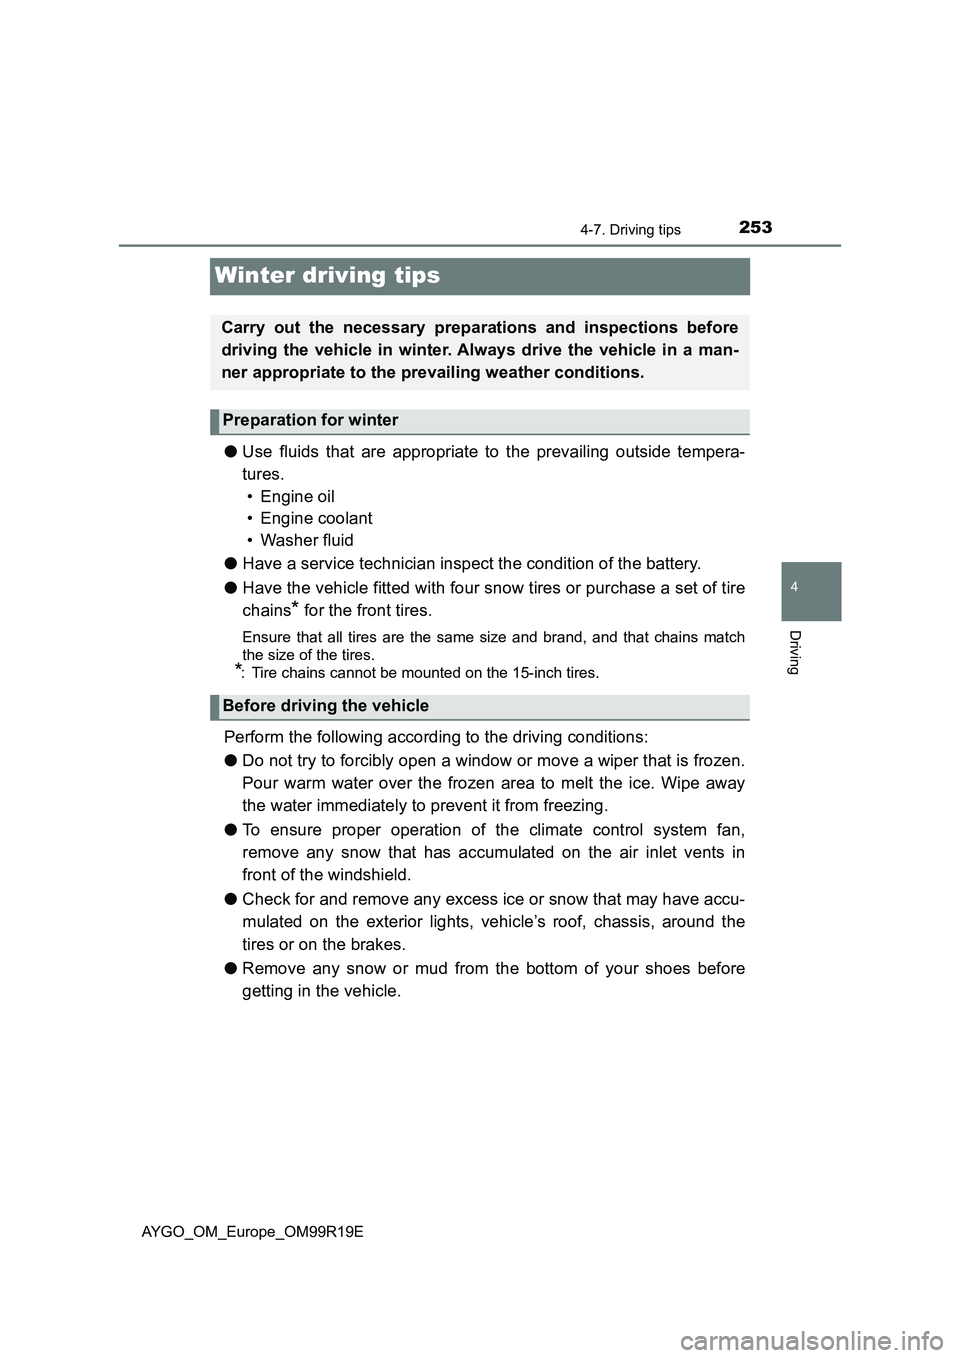 TOYOTA AYGO 2019  Owners Manual (in English) 253
4
4-7. Driving tips
Driving
AYGO_OM_Europe_OM99R19E
Winter driving tips
●Use fluids that are appropriate to the prevailing outside tempera- 
tures.  
• Engine oil 
• Engine coolant 
• Wash